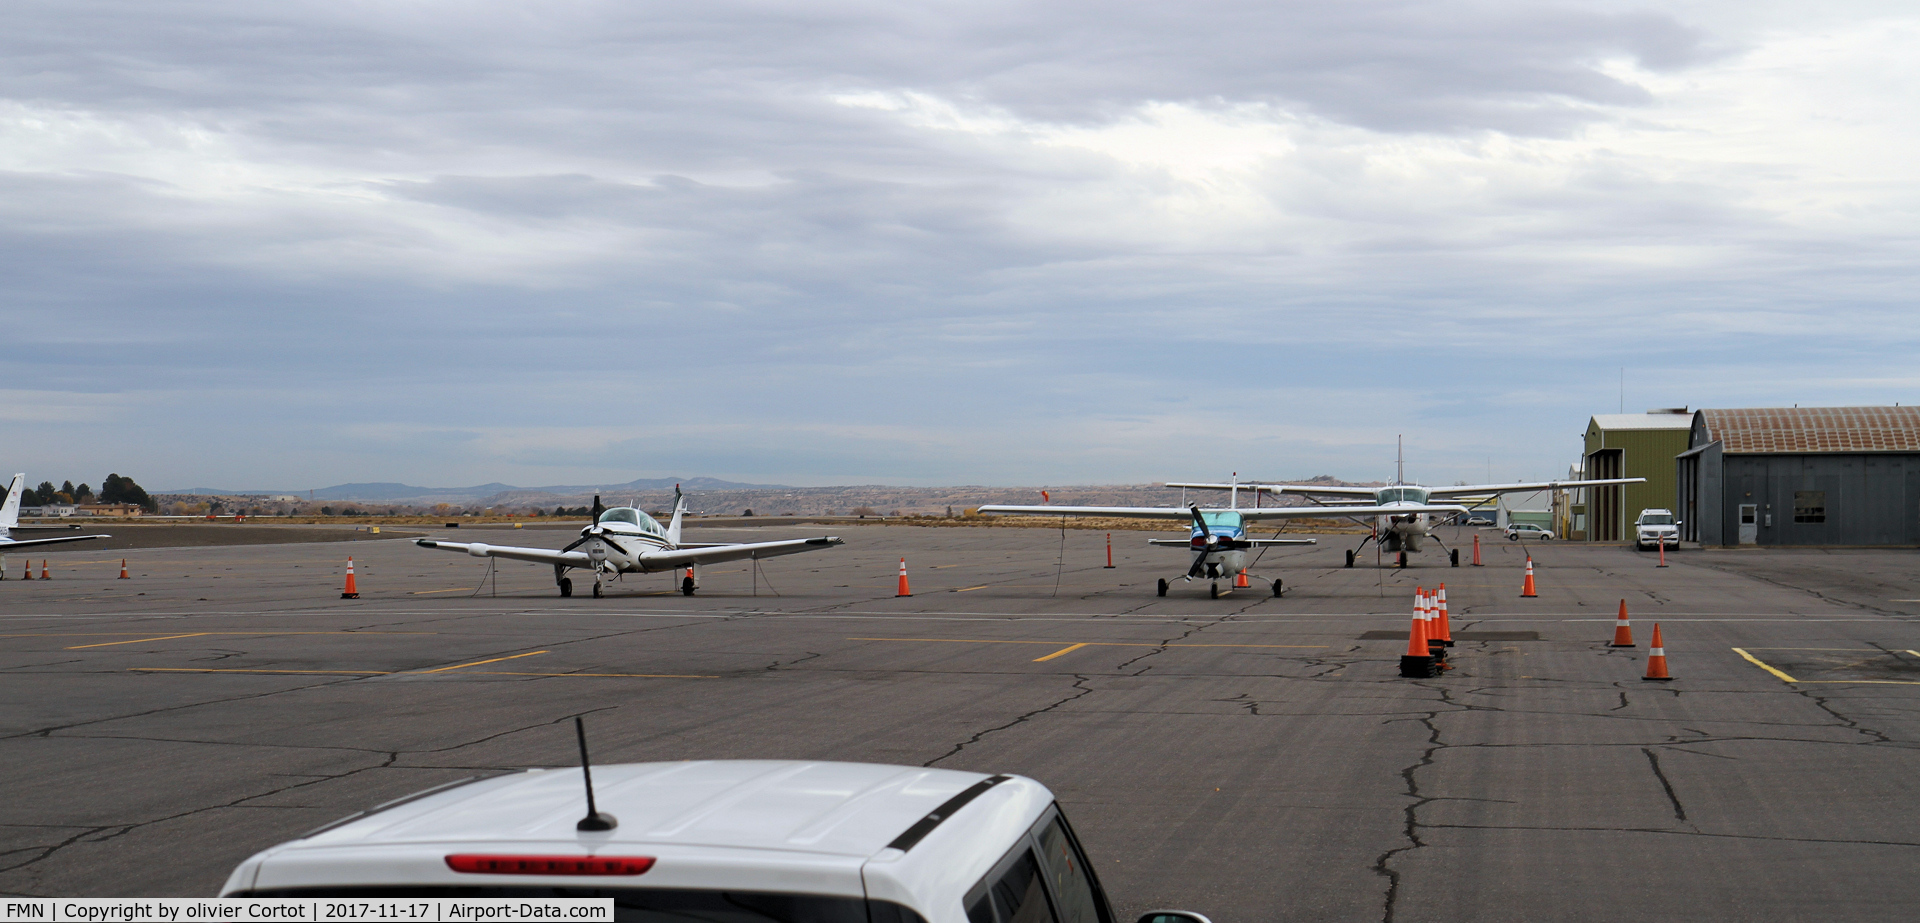 Four Corners Regional Airport (FMN) - view on the tarmac